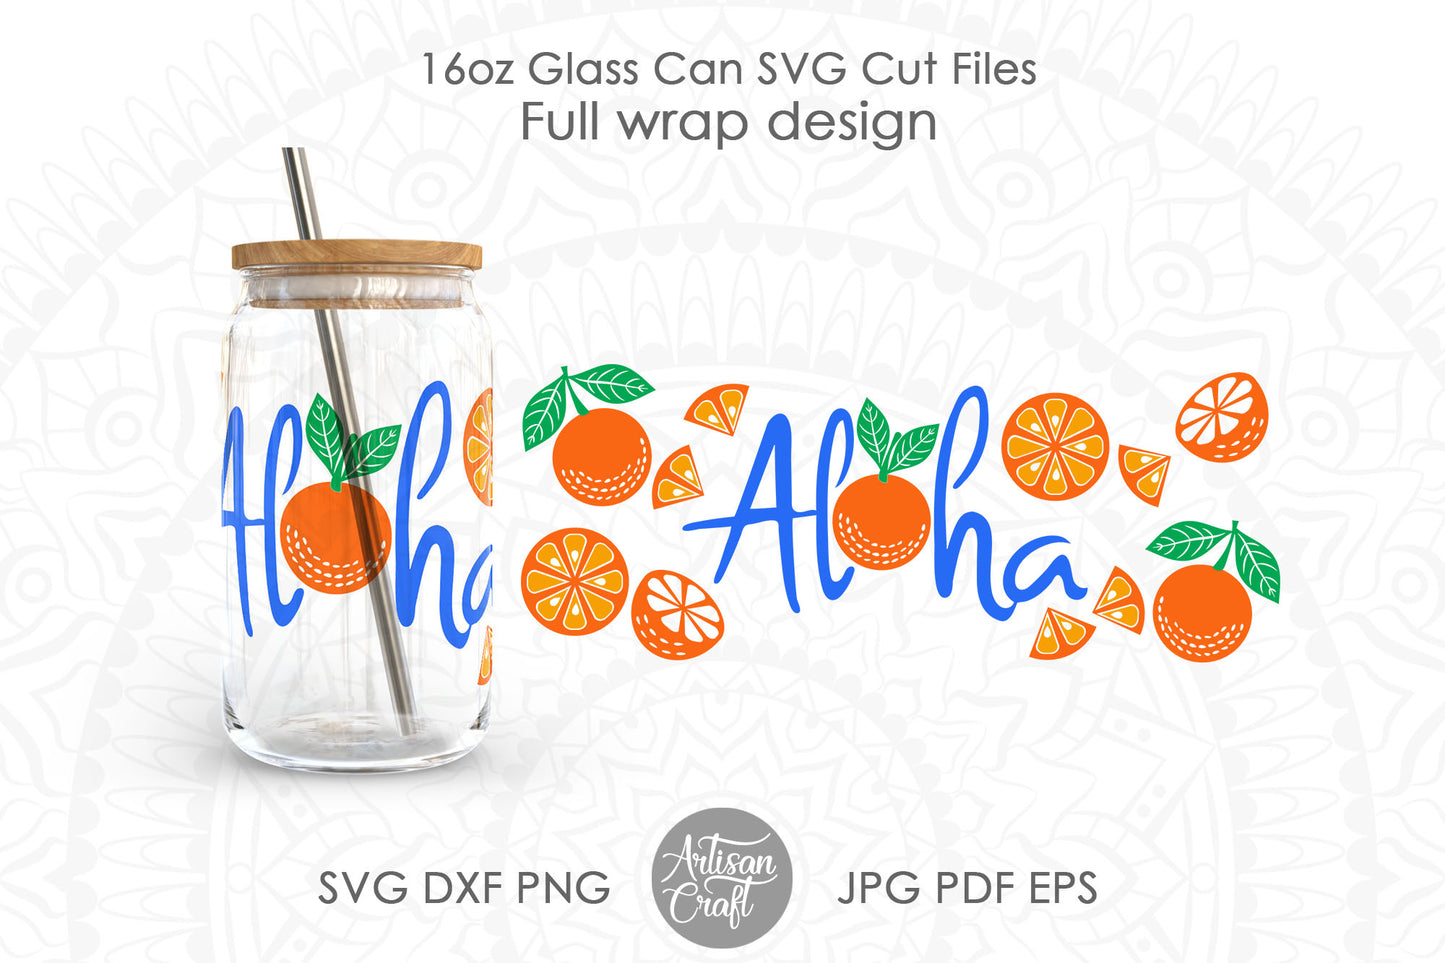 Summer can glass SVG showing oranges